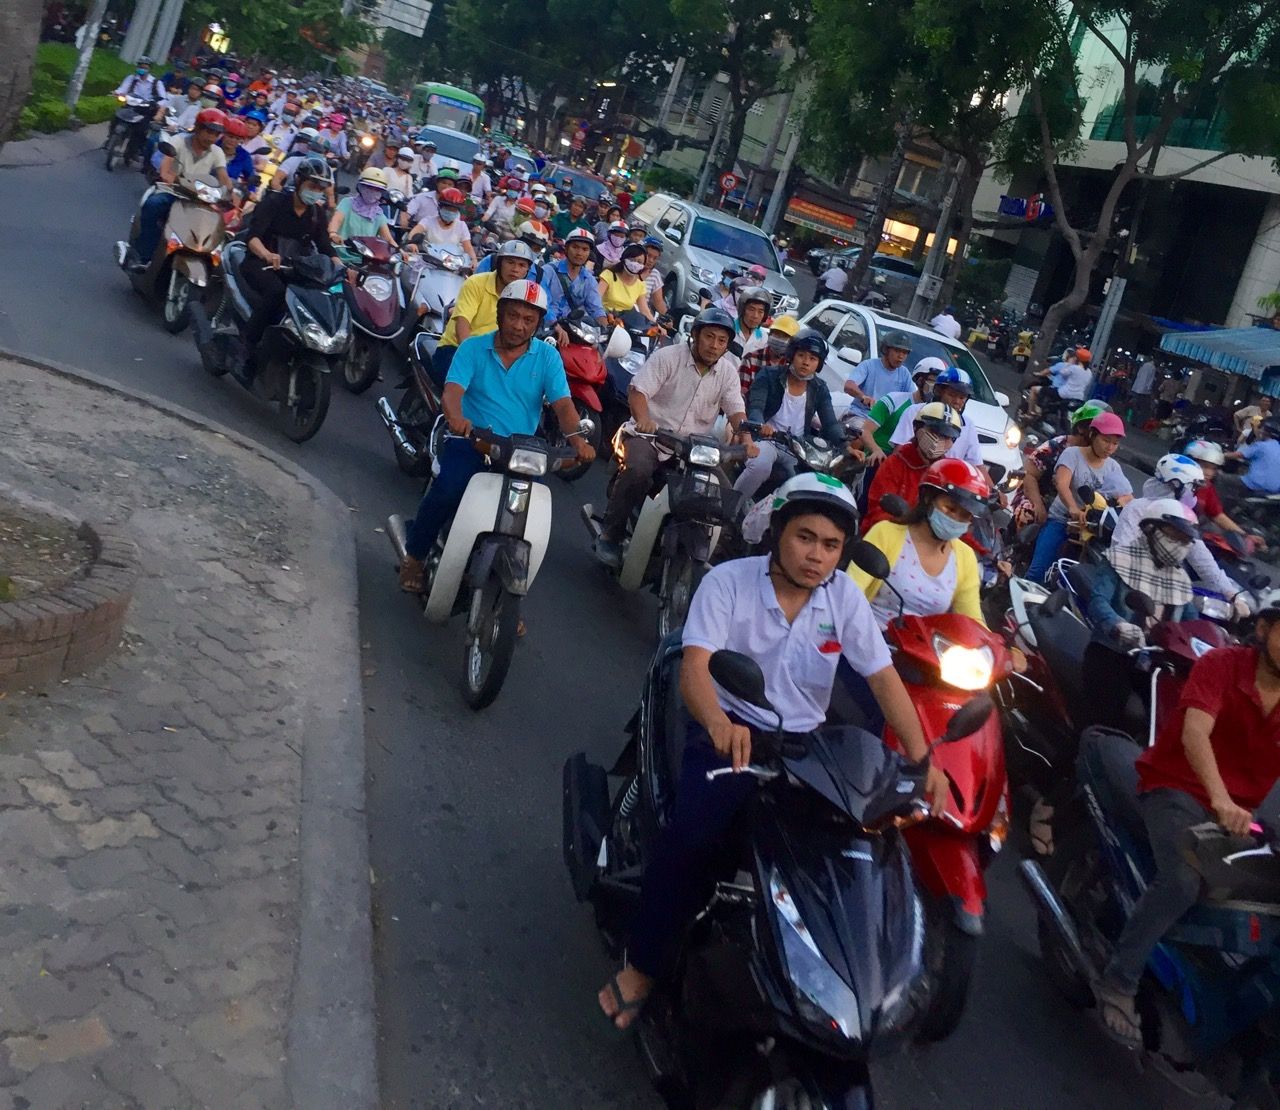 A street filled with thousands of motorbikes during rush hour.